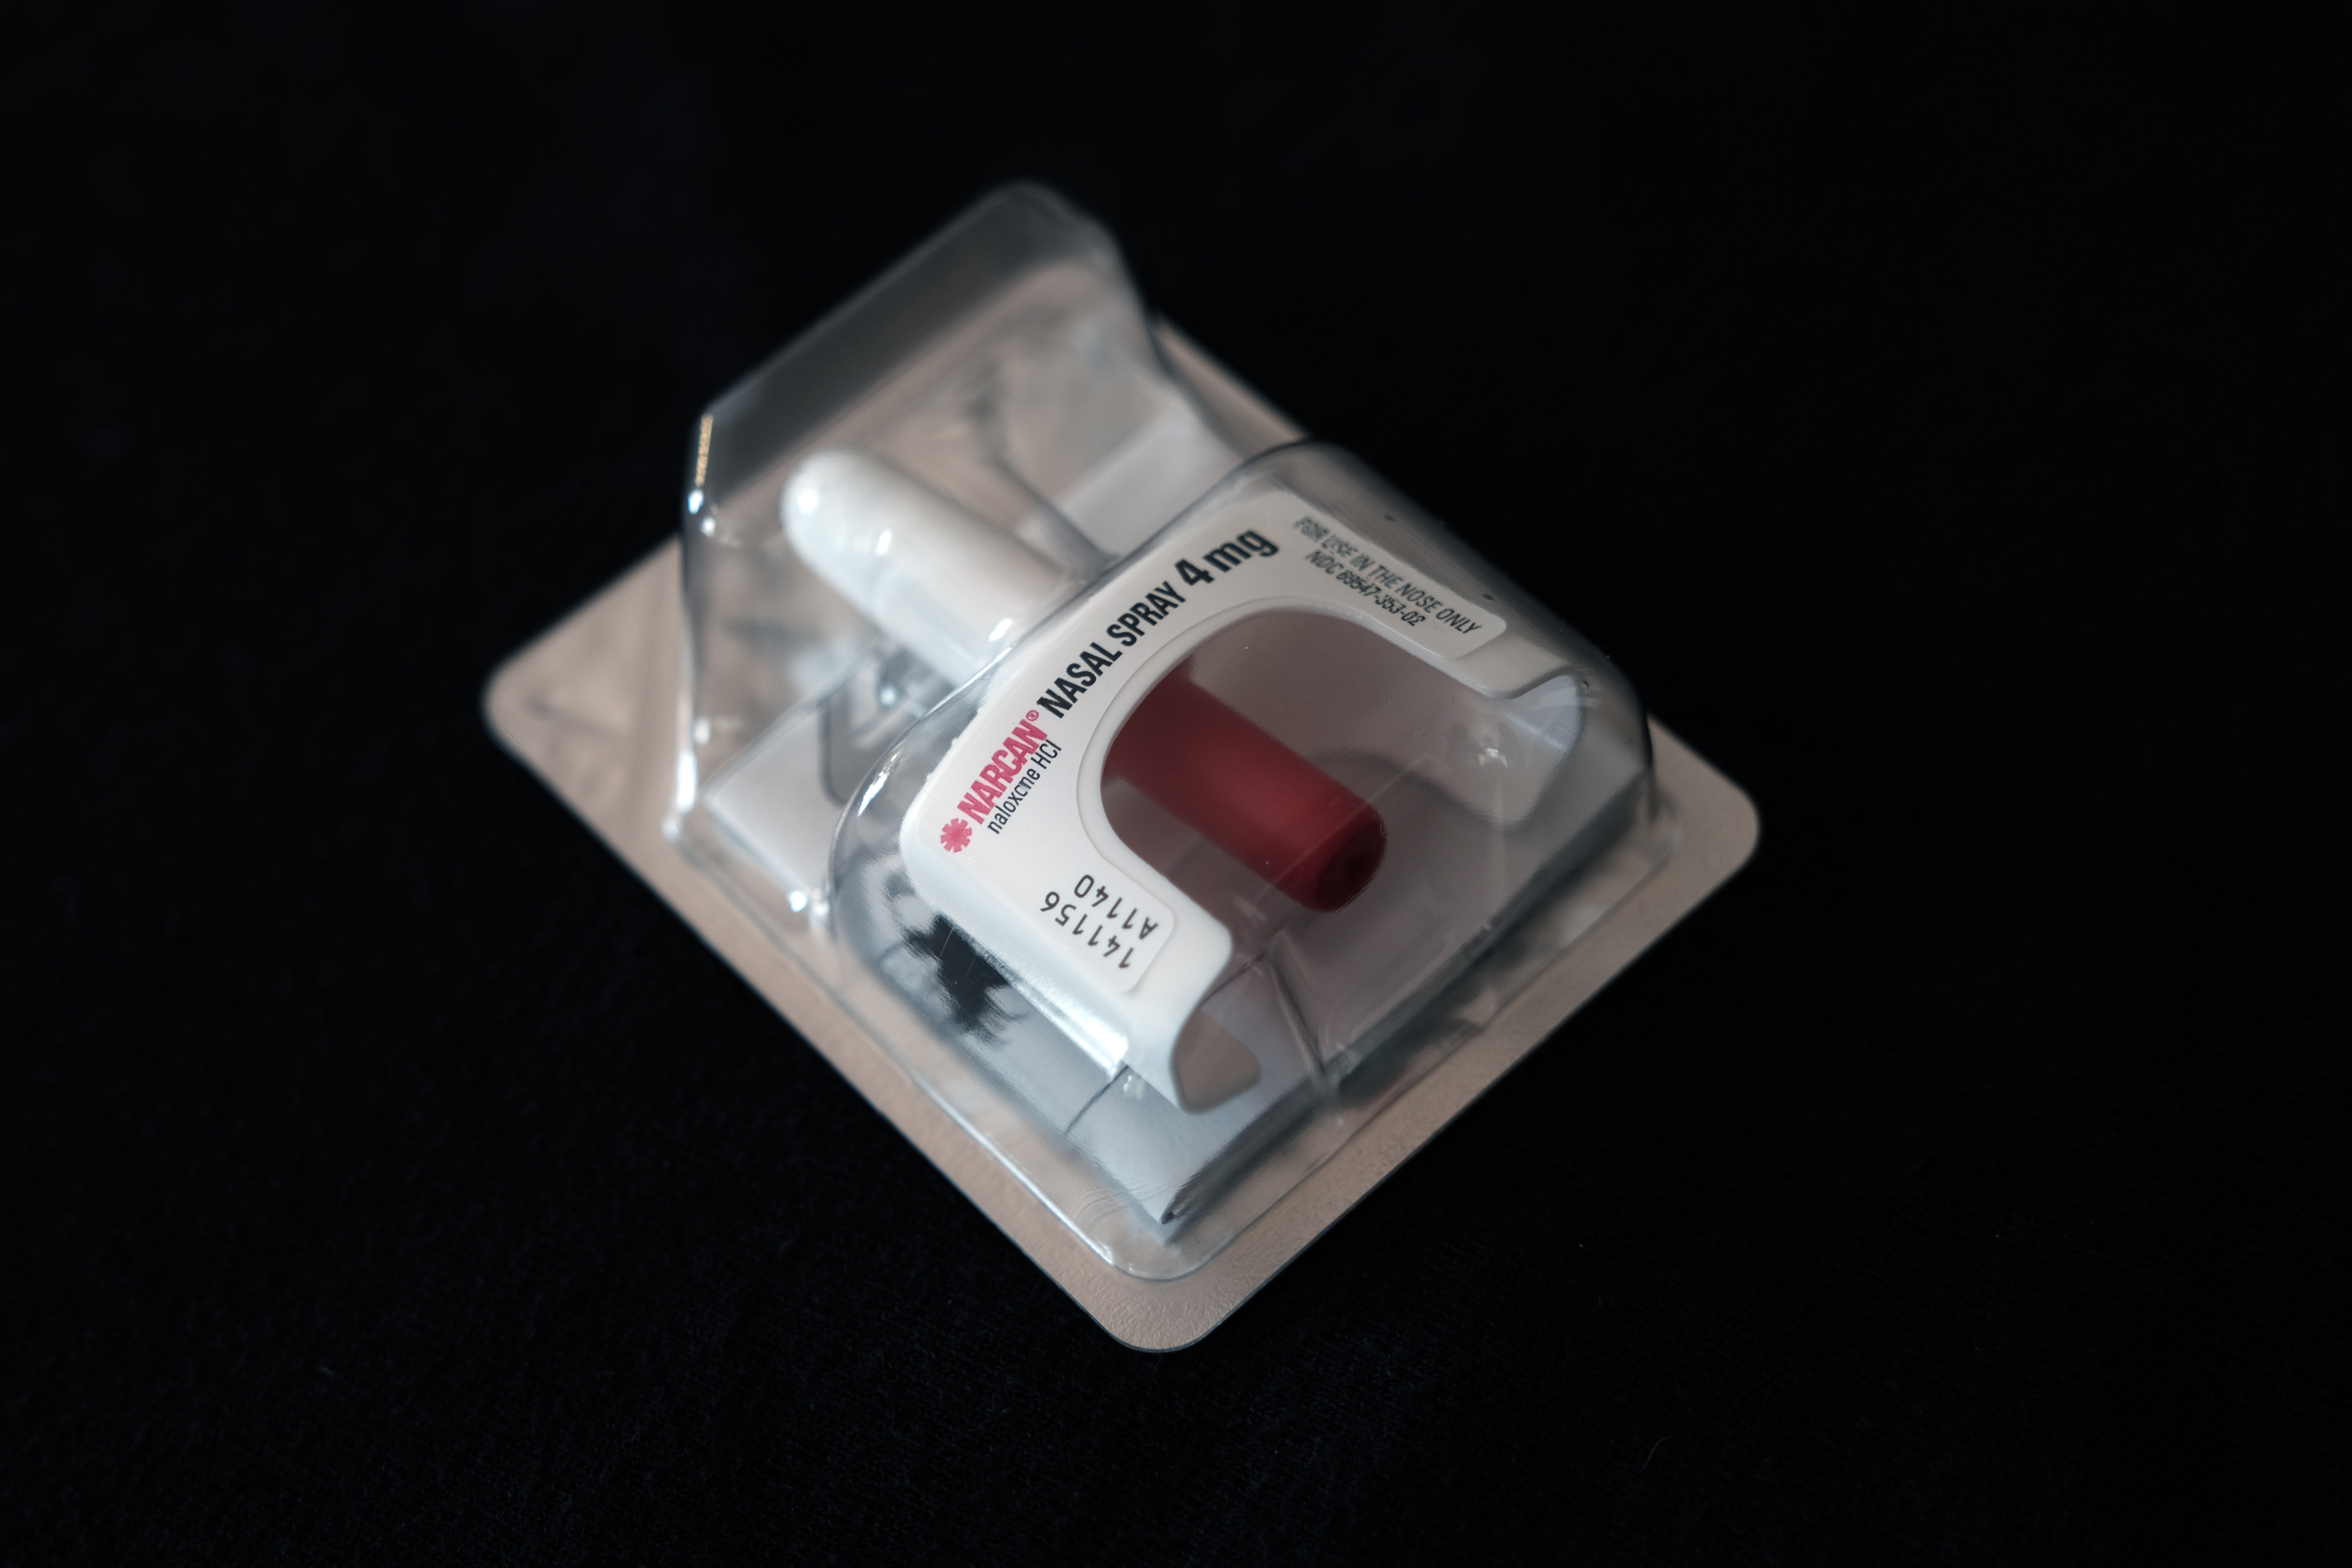 NEW YORK, NEW YORK - SEPTEMBER 01: In this photo illustration, A Narcan nasal overdose kit, given out free by the city of New York, is displayed as part of the Brooklyn Community Recovery Center's demonstration on how to use Narcan to revive a person in the case of a drug overdose on September 01, 2022 in the Brooklyn borough of New York City. Nearly one million people have died of drug overdose deaths in America in the past two decades, with an increasing majority of those deaths due to synthetic opioids like fentanyl. The Brooklyn Community Recovery Center handed out packs of Narcan nasal spray before holding a brief vigil to those lives lost due to drug overdoses. (Photo Illustration by Spencer Platt/Getty Images)